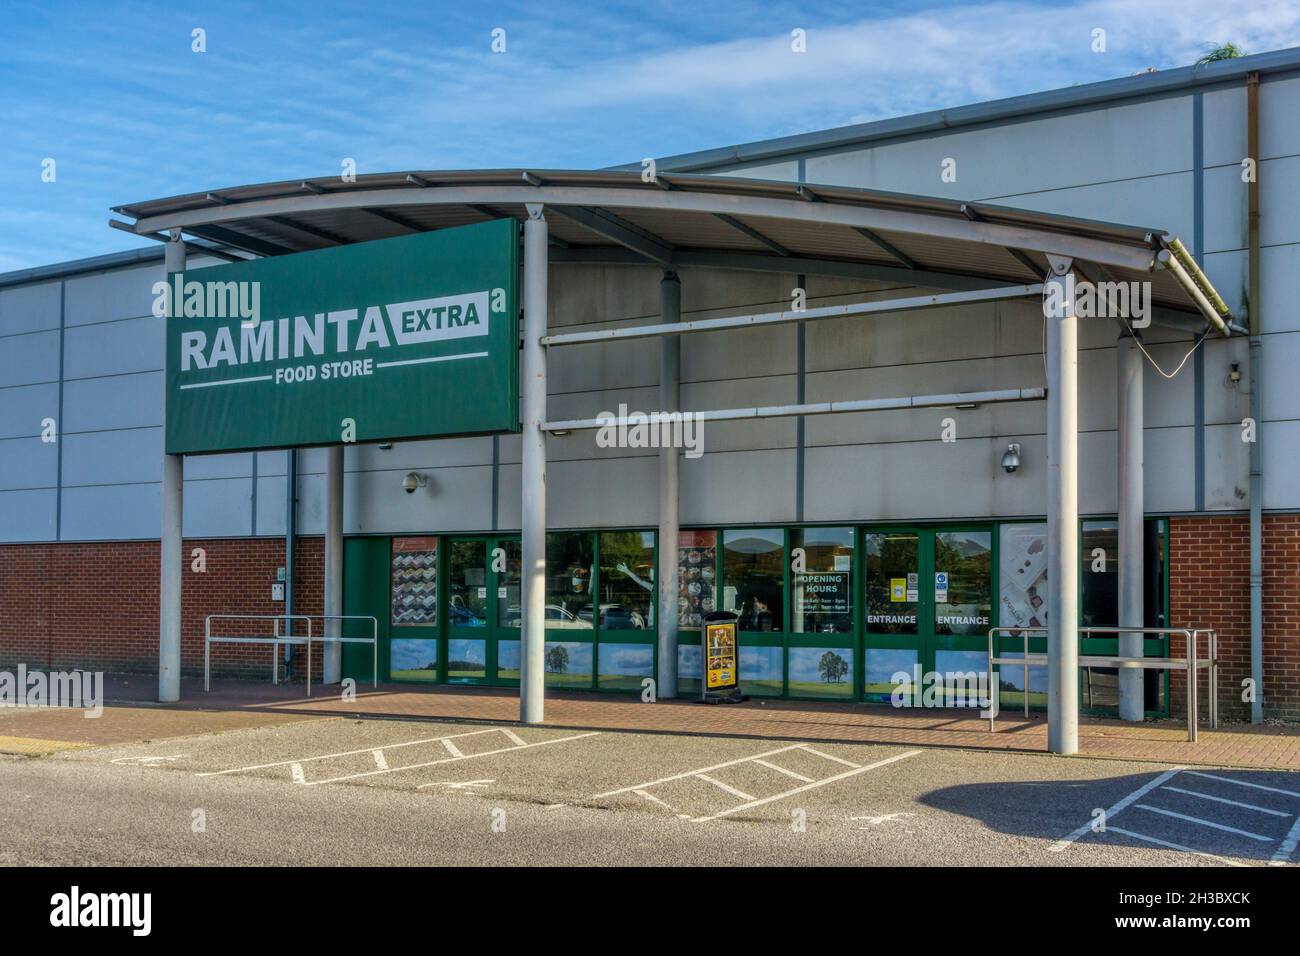 The Raminta Extra Food Store in King's Lynn.  A Lithuanian food shop. Stock Photo